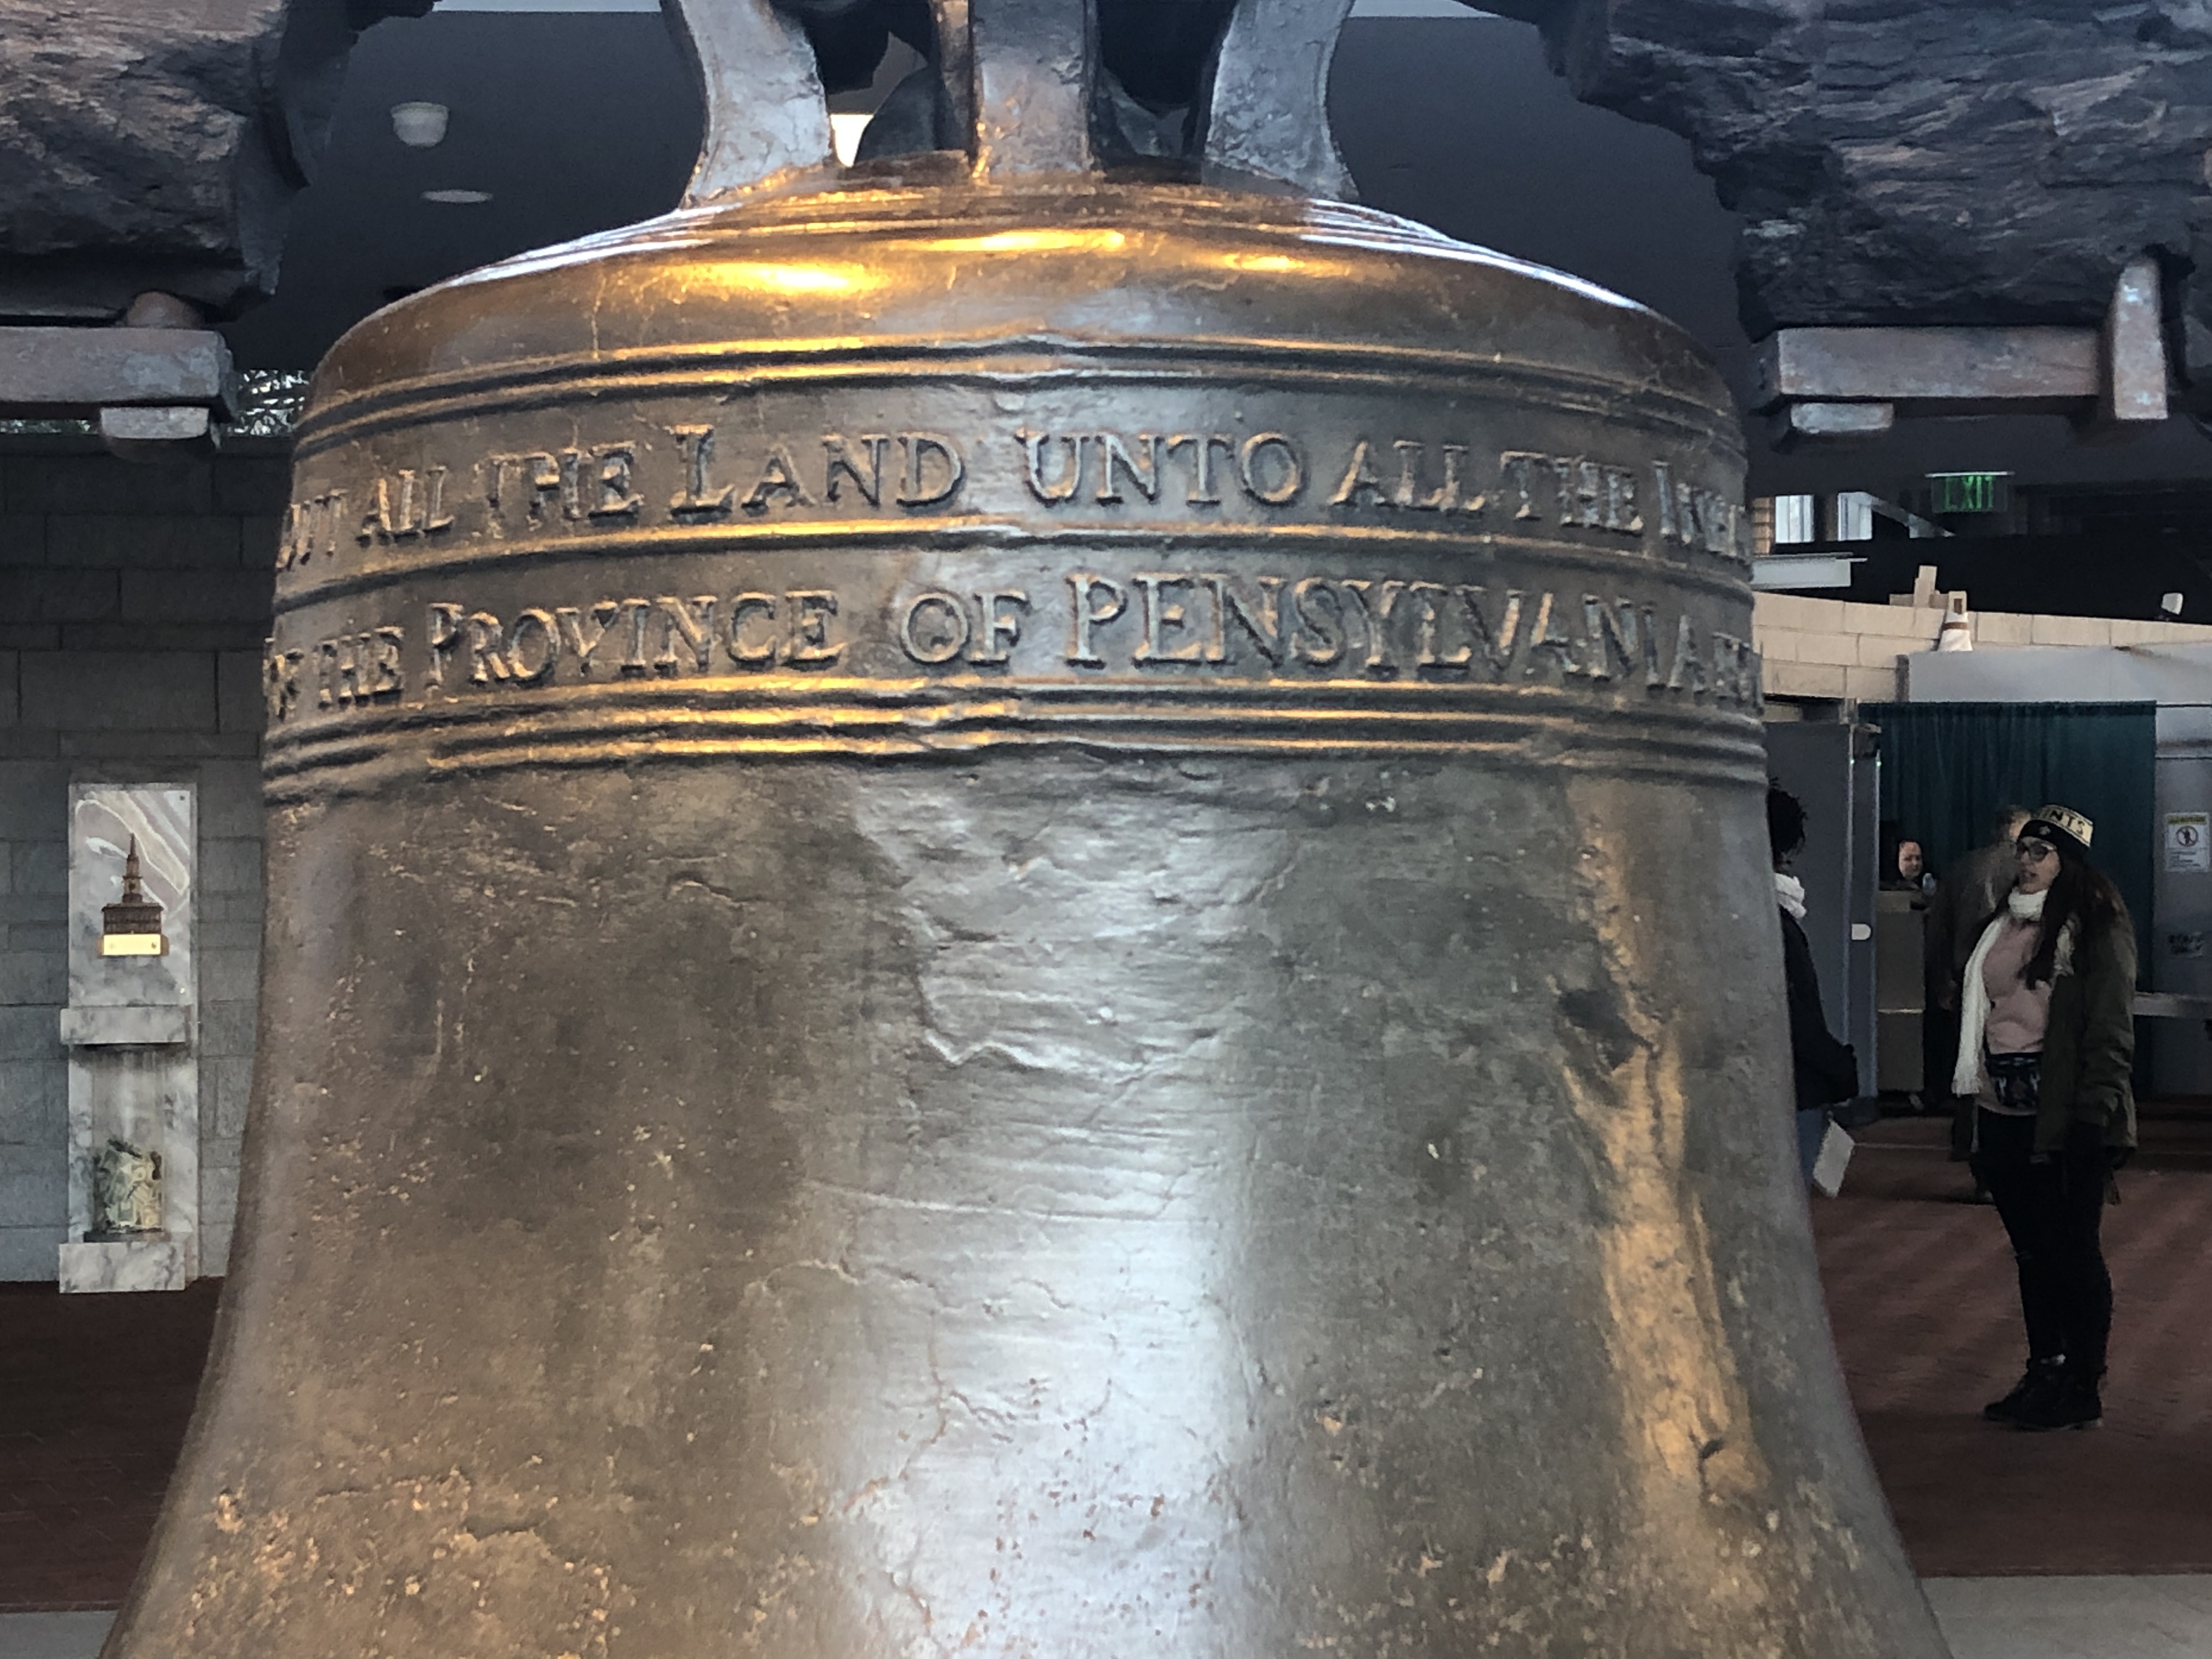 5 fun facts you didn’t know about the Liberty Bell | dosage MAGAZINE